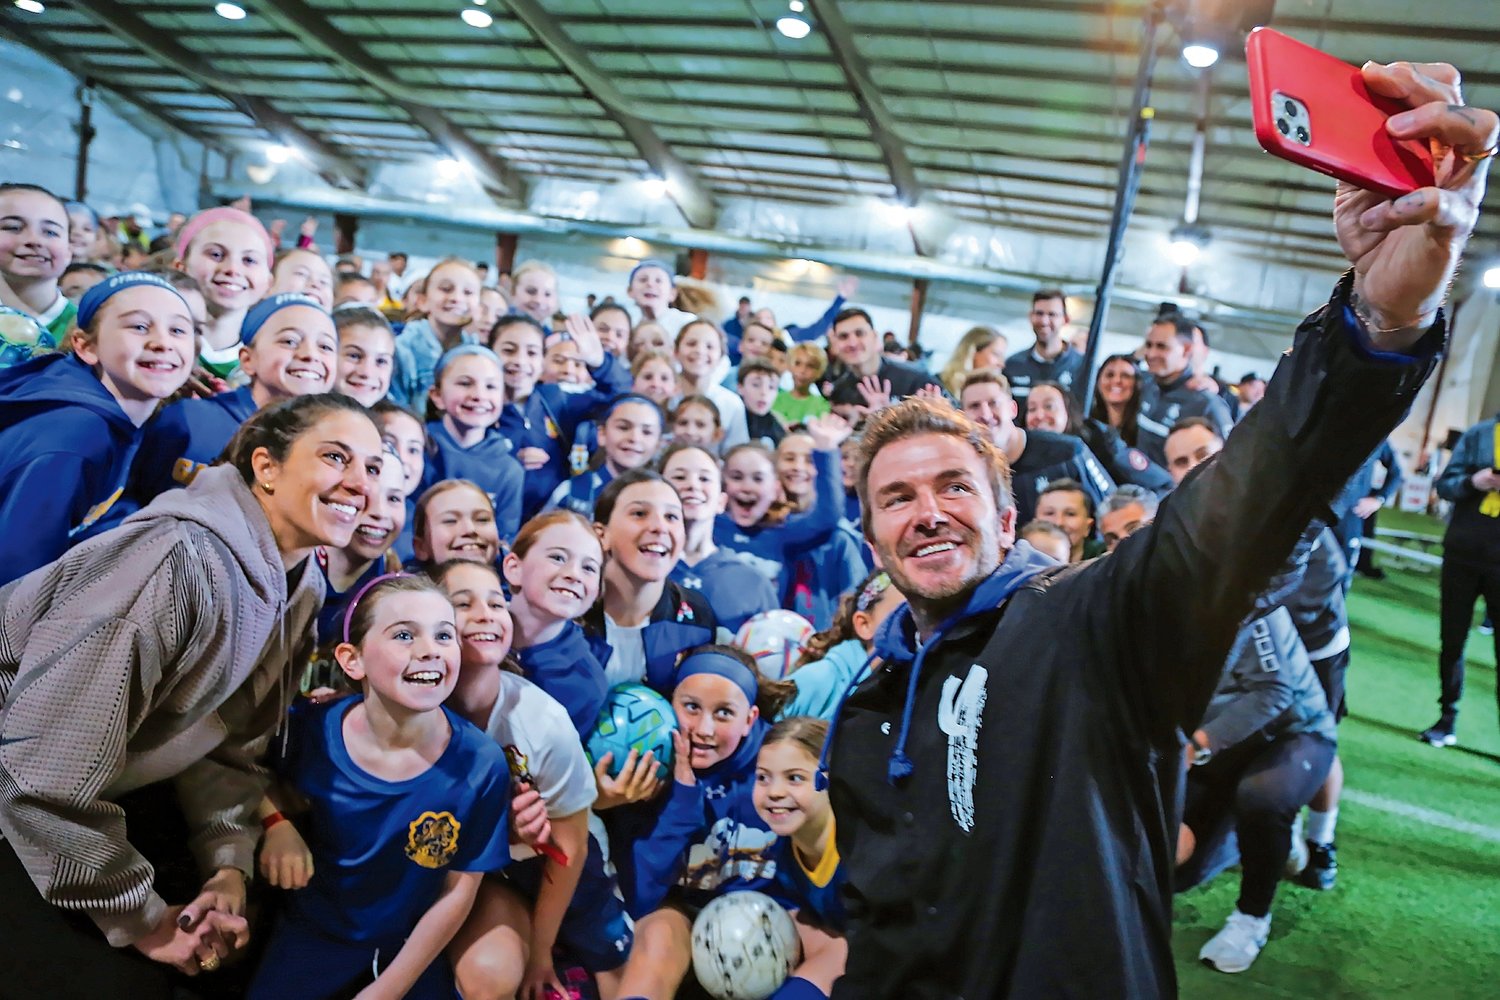 Soccer icon David Beckham snaps a selfie with some of Long Island's best up-and-coming young soccer players during a surprise visit to the Mitchell Athletic Complex on Saturday, as part of the Sands Youth Power Initiative.